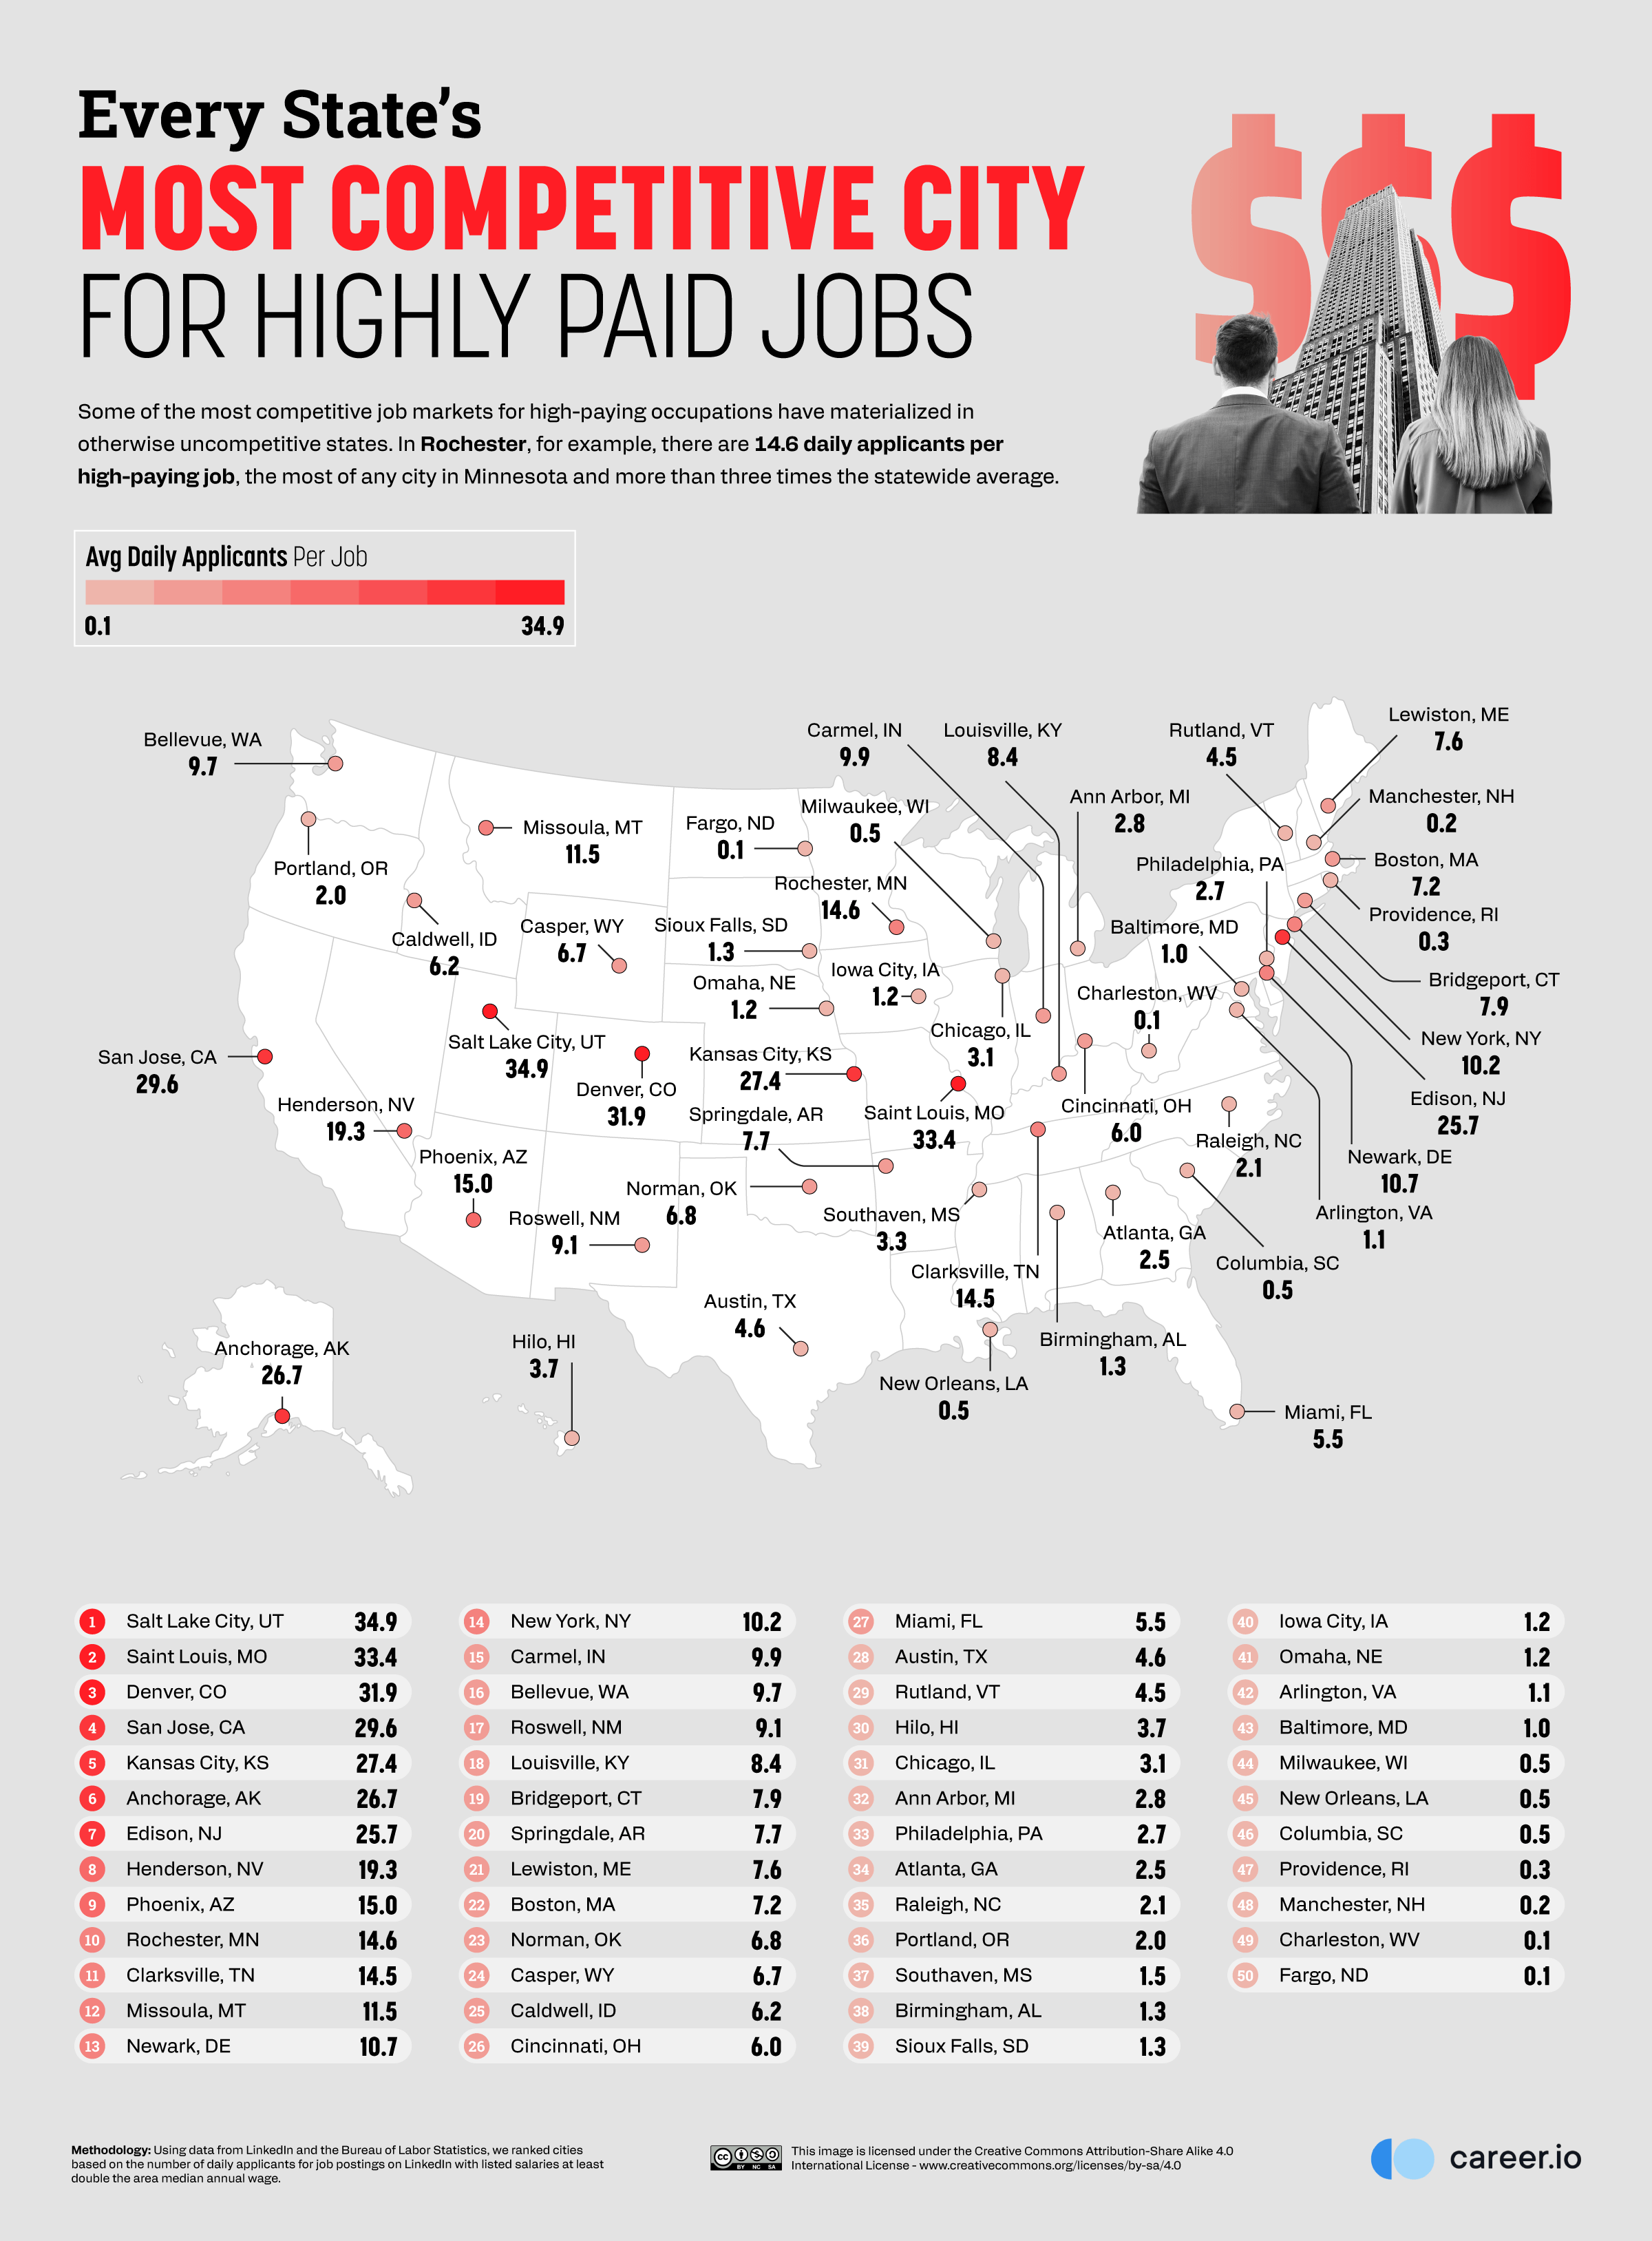 02_Every-States-Most-Competitive-City-for-Highly-Paid-Jobs.png